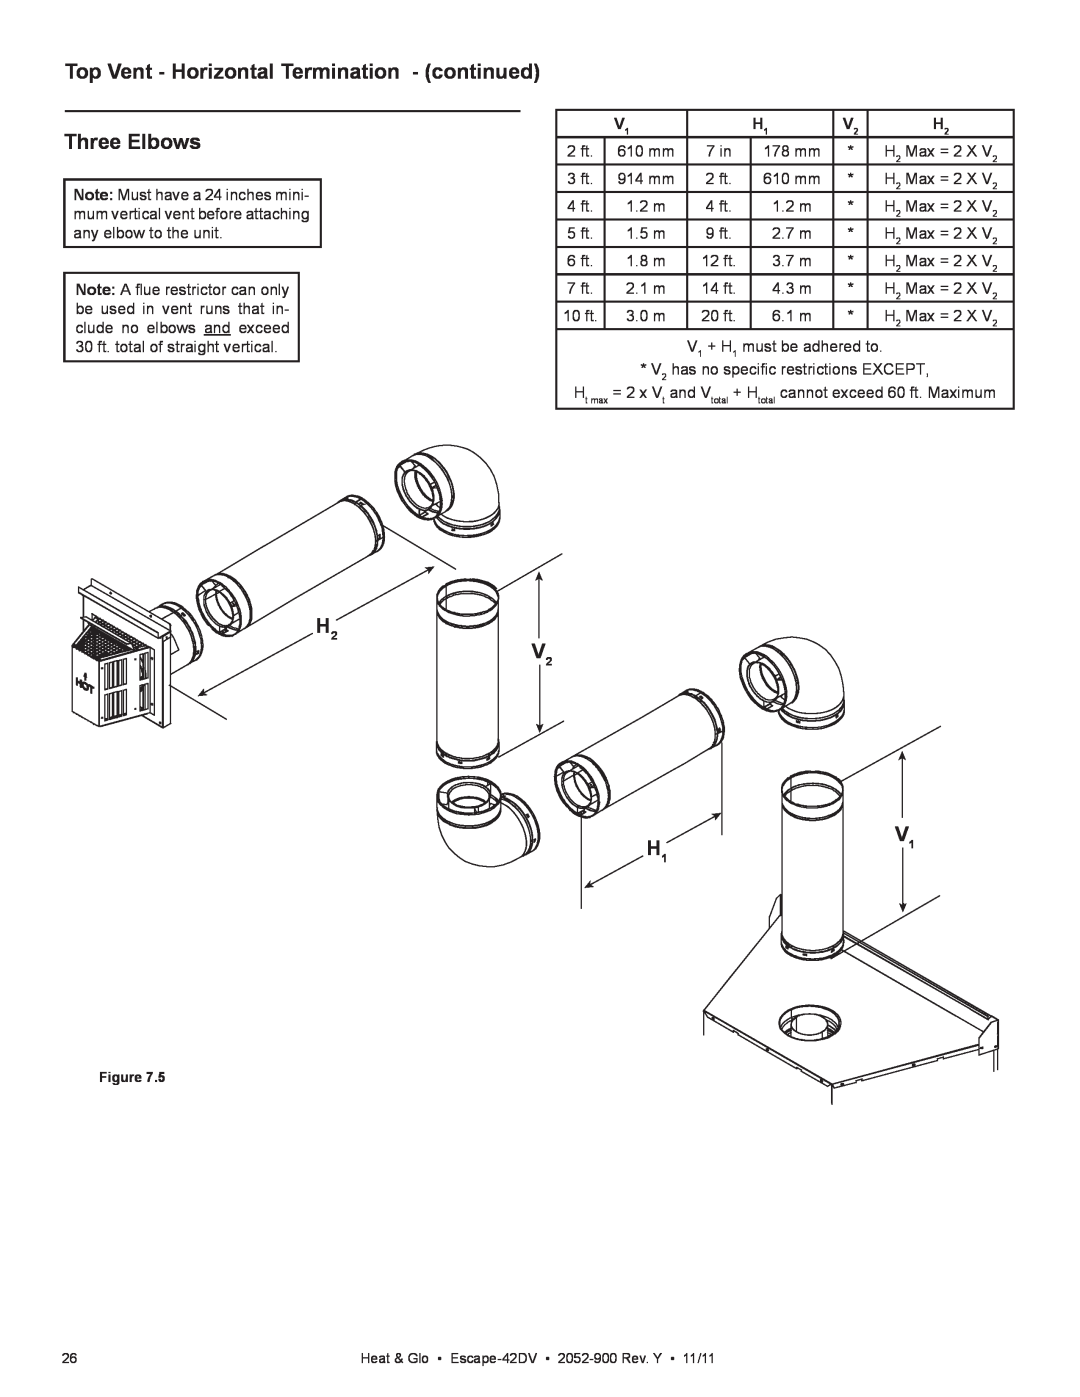 Heat & Glo LifeStyle Escape-42DVLP owner manual Top Vent - Horizontal Termination - continued, Three Elbows, V2 H1 